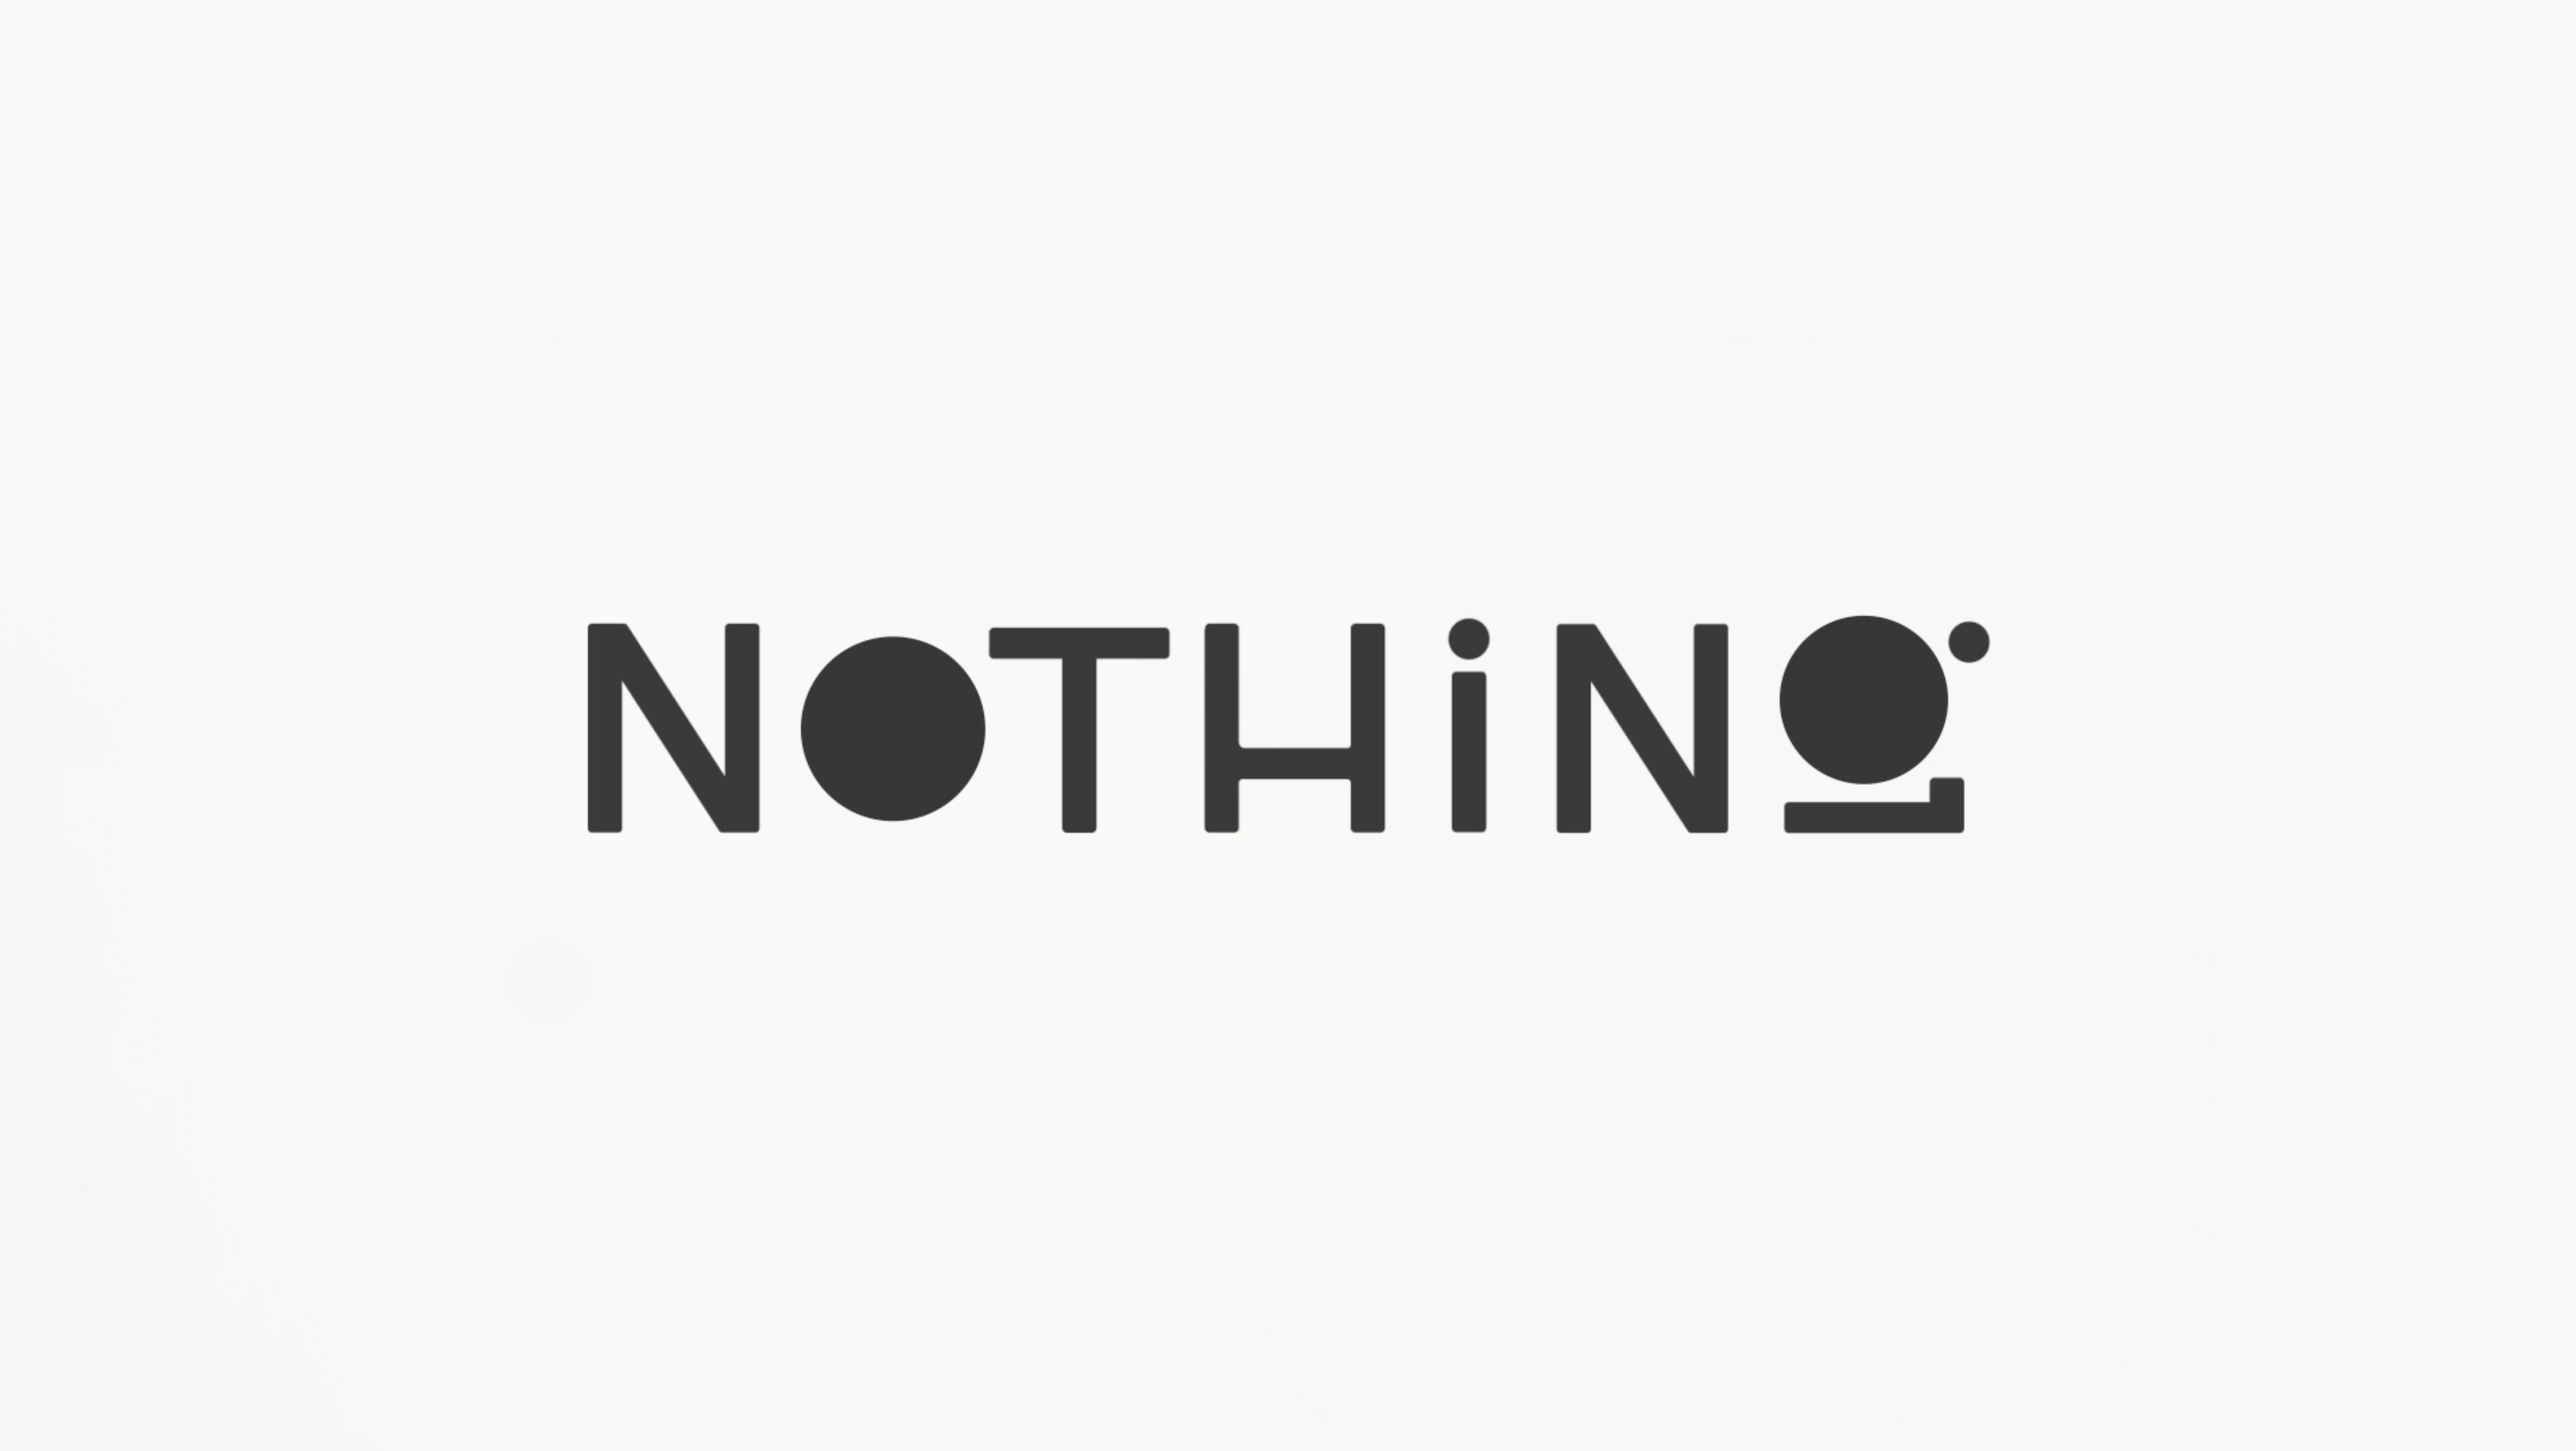 Packaging & Visual Identity for brand ' Nothing'. White background with black typography saying 'Nothing'